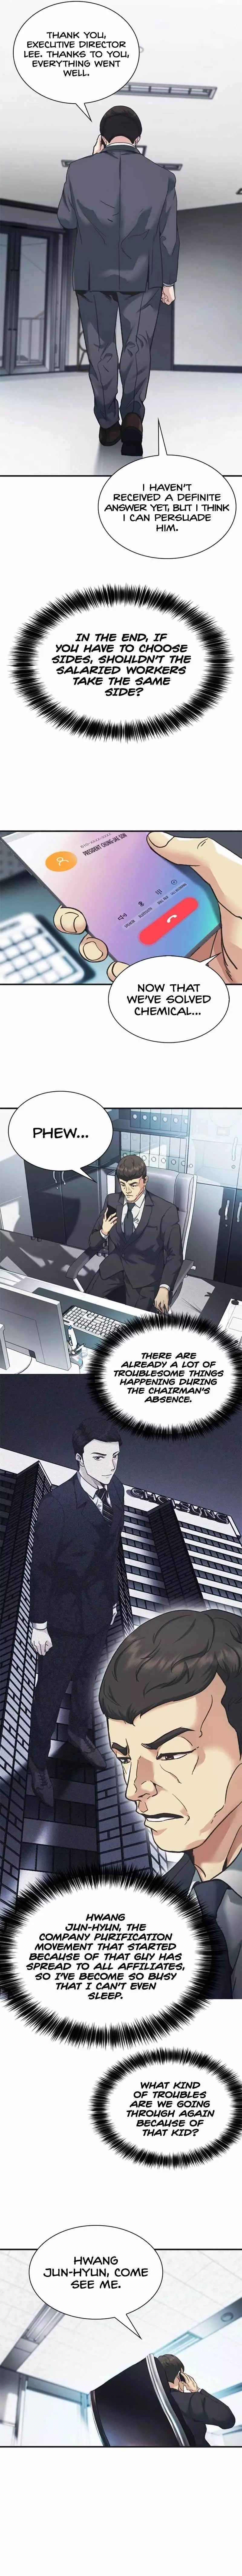 Chairman Kang, The New Employee - 28 page 15-704d88ea